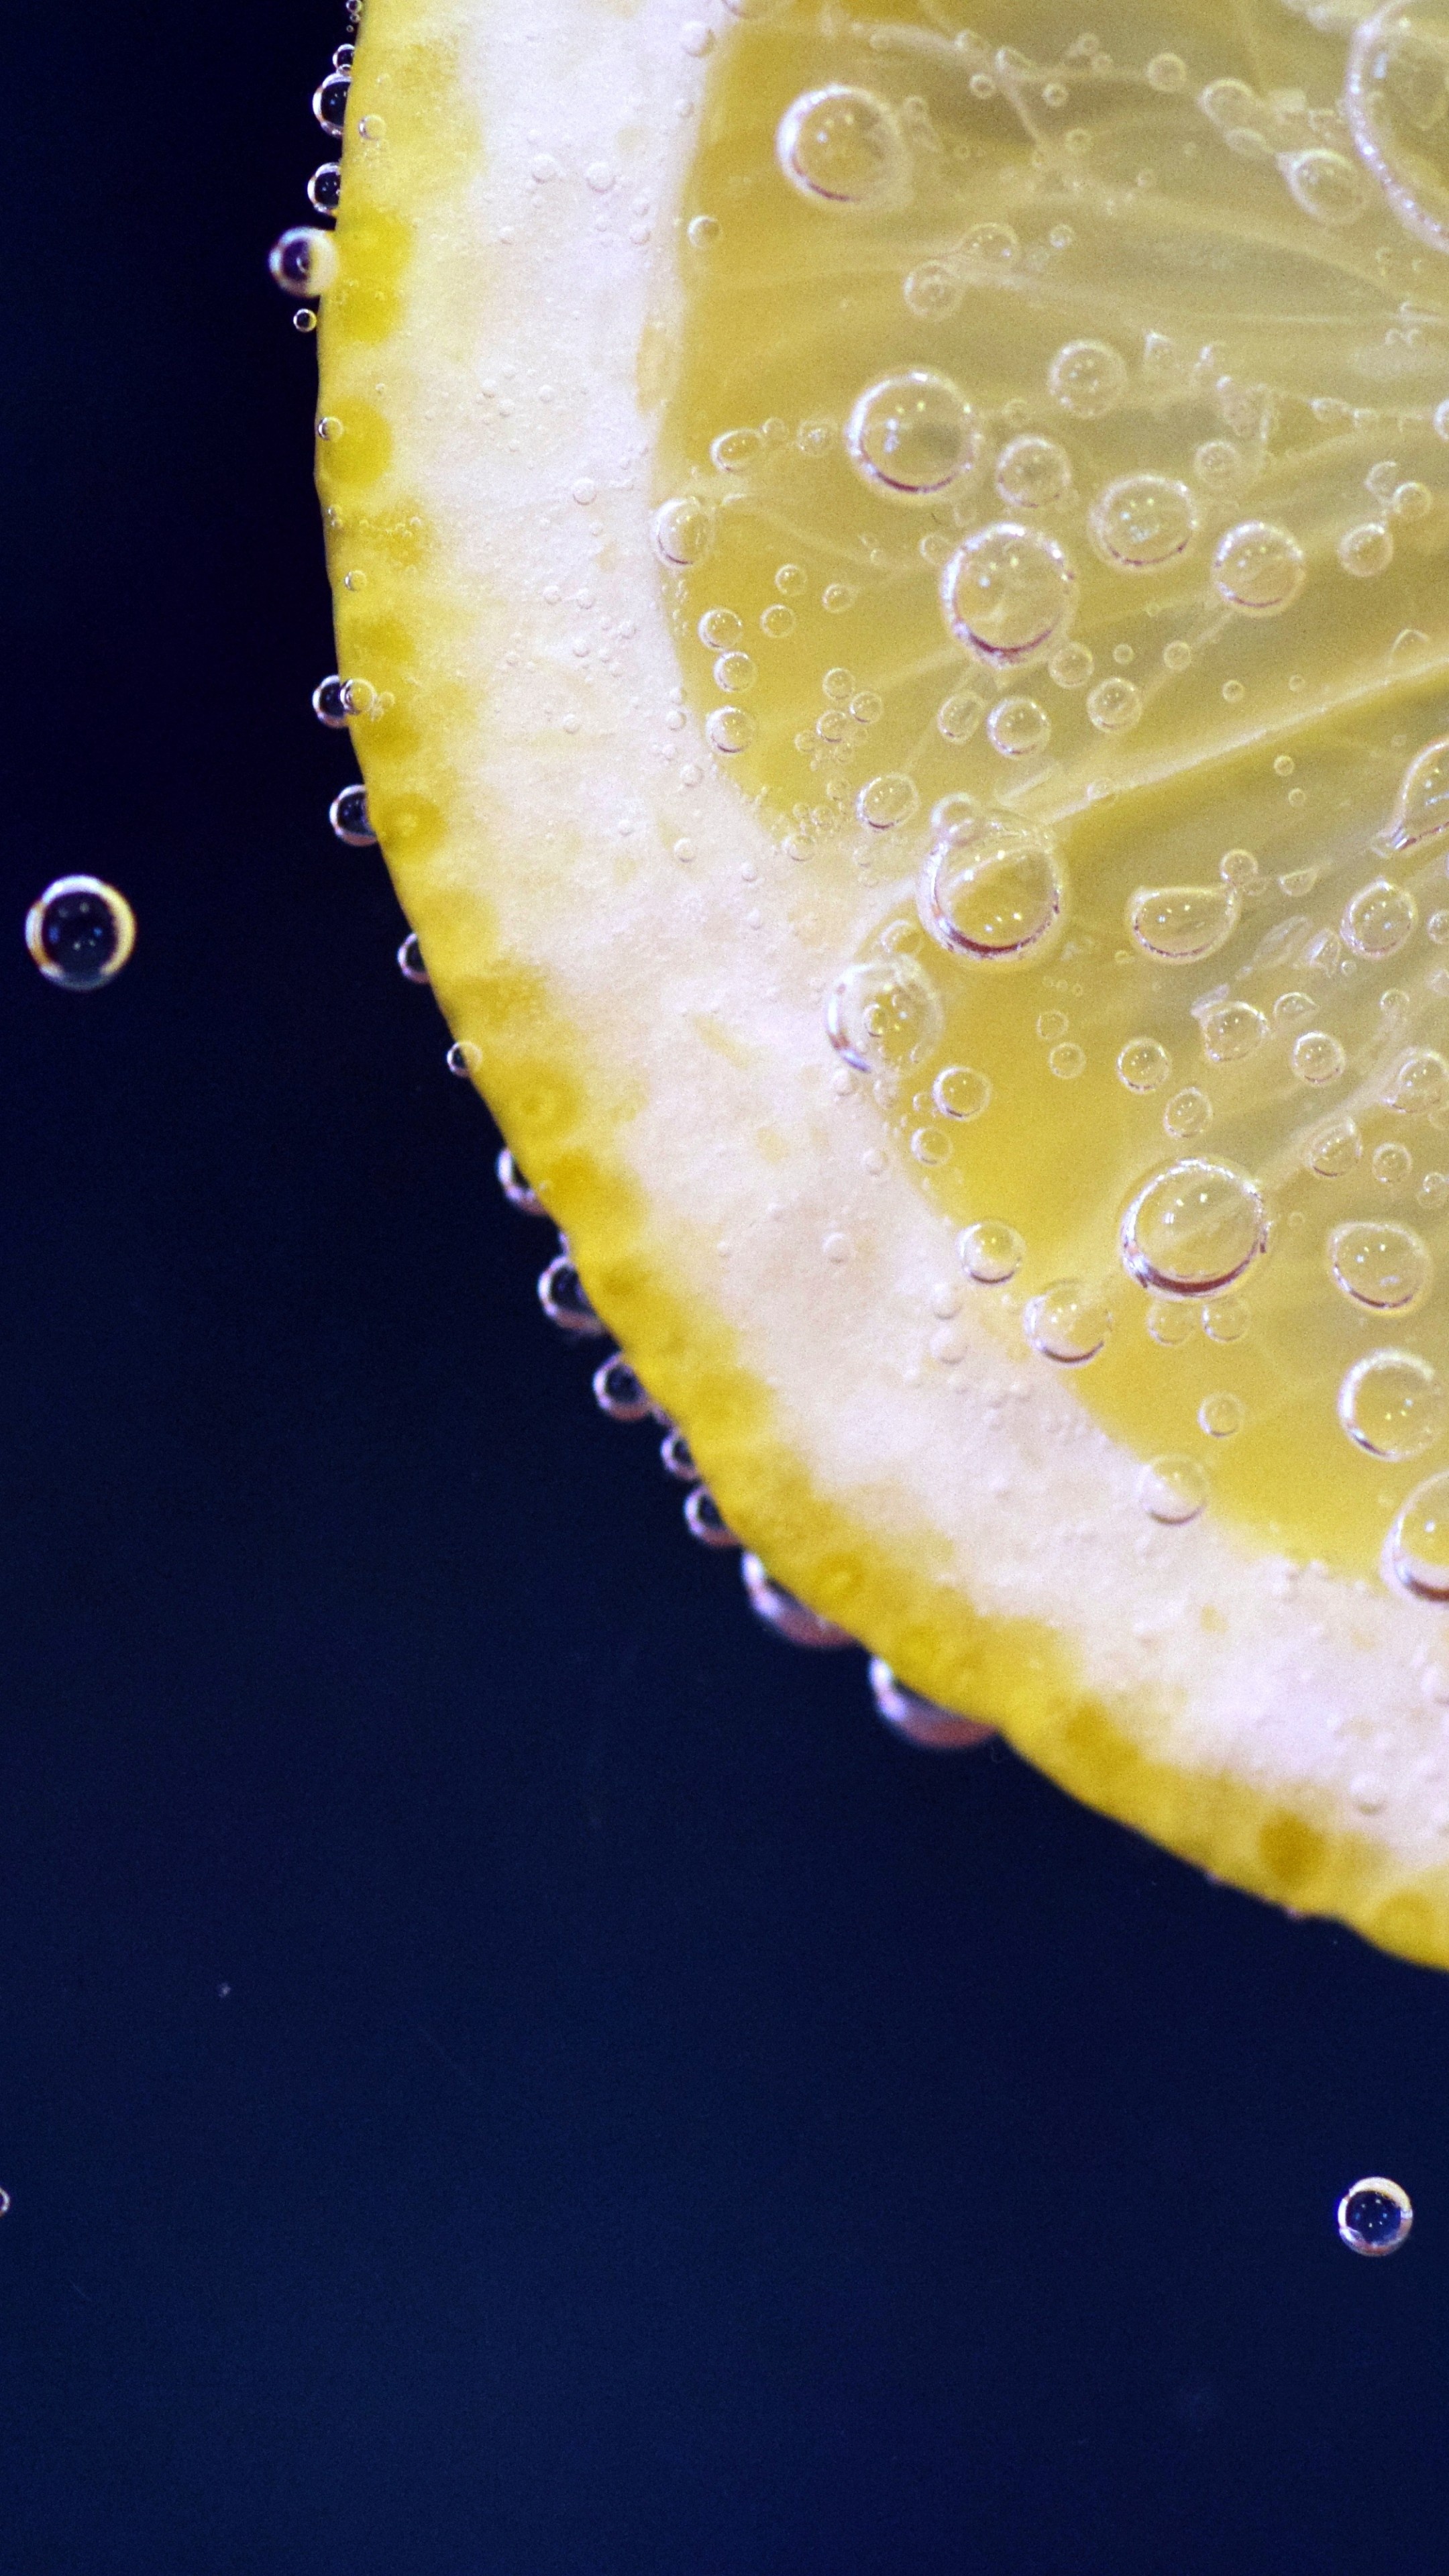 Lemon: Its juice is about 5% to 6% citric acid, with a pH of around 2.2. 2160x3840 4K Background.